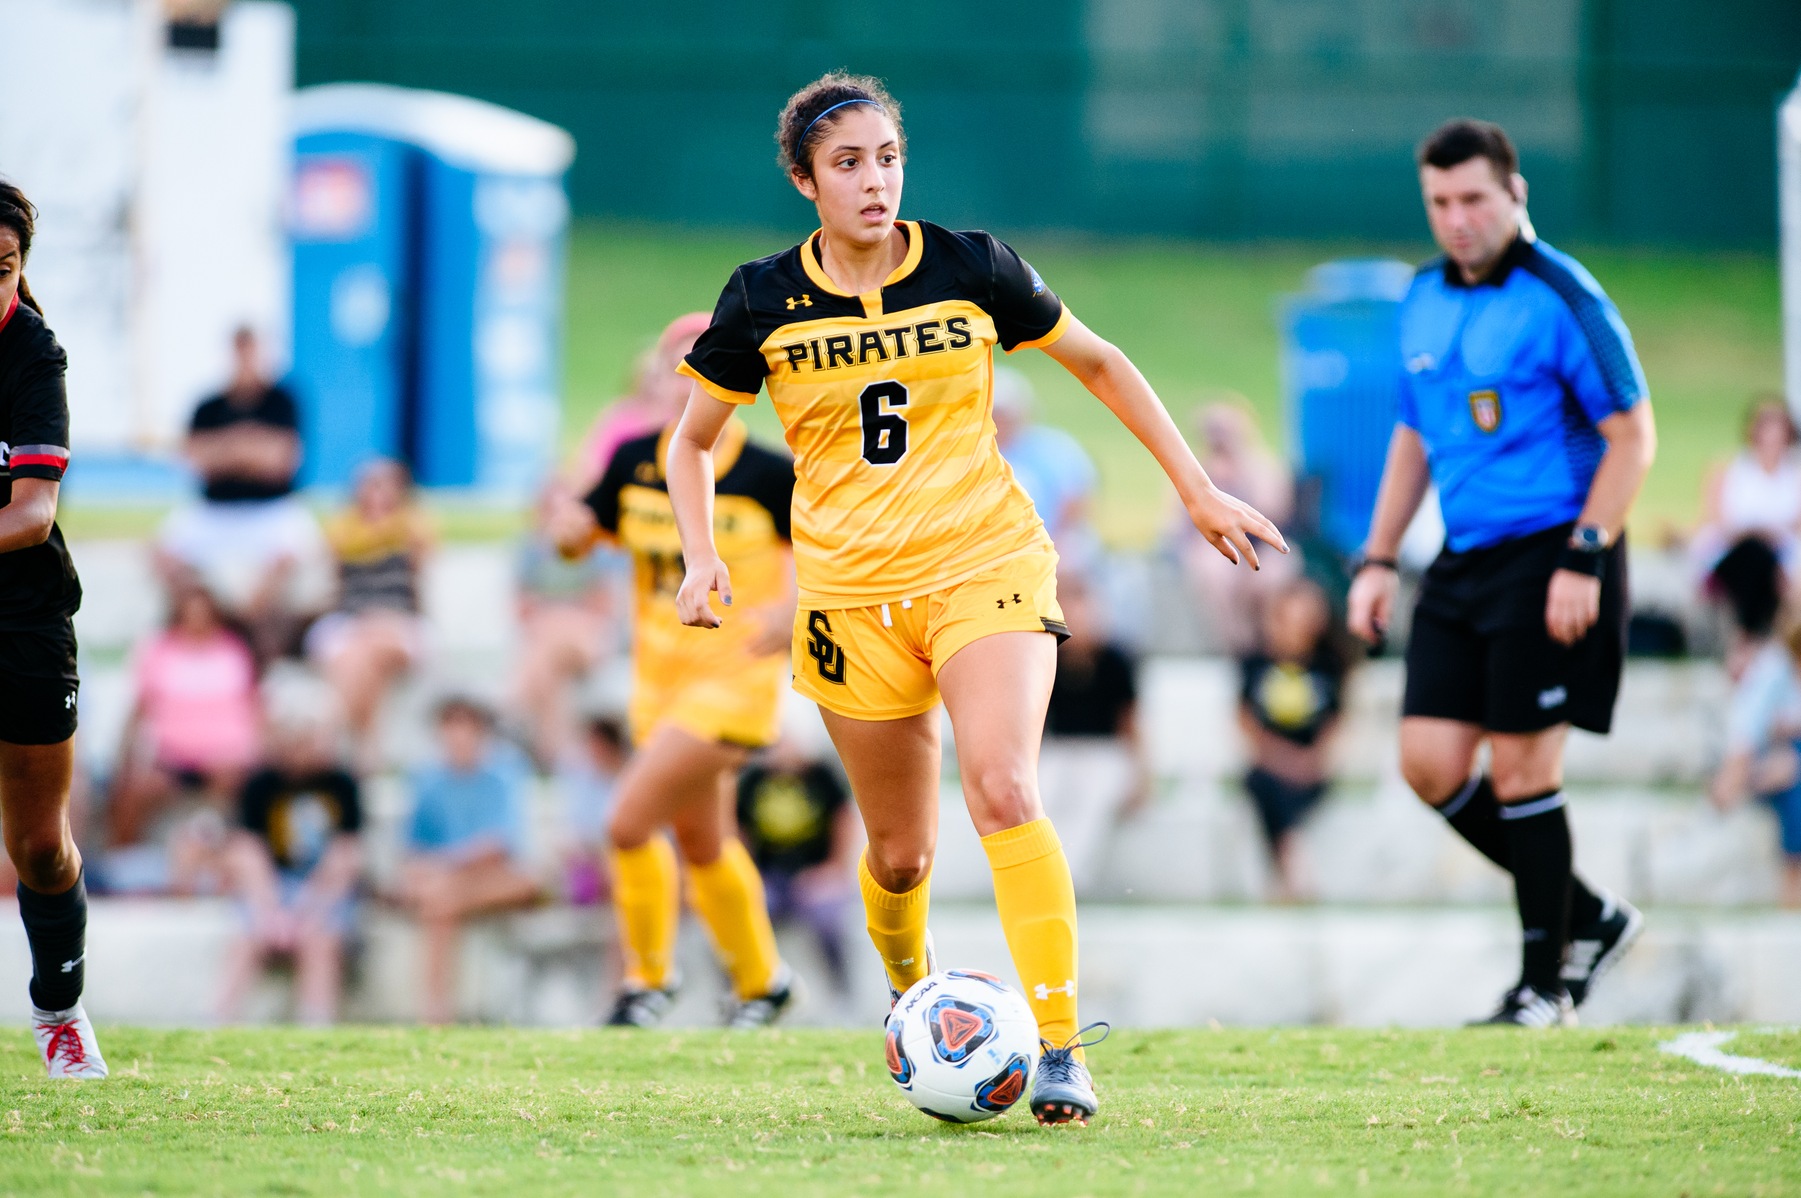 Women's Soccer Scores Four Goals in First Half to Defeat Austin College